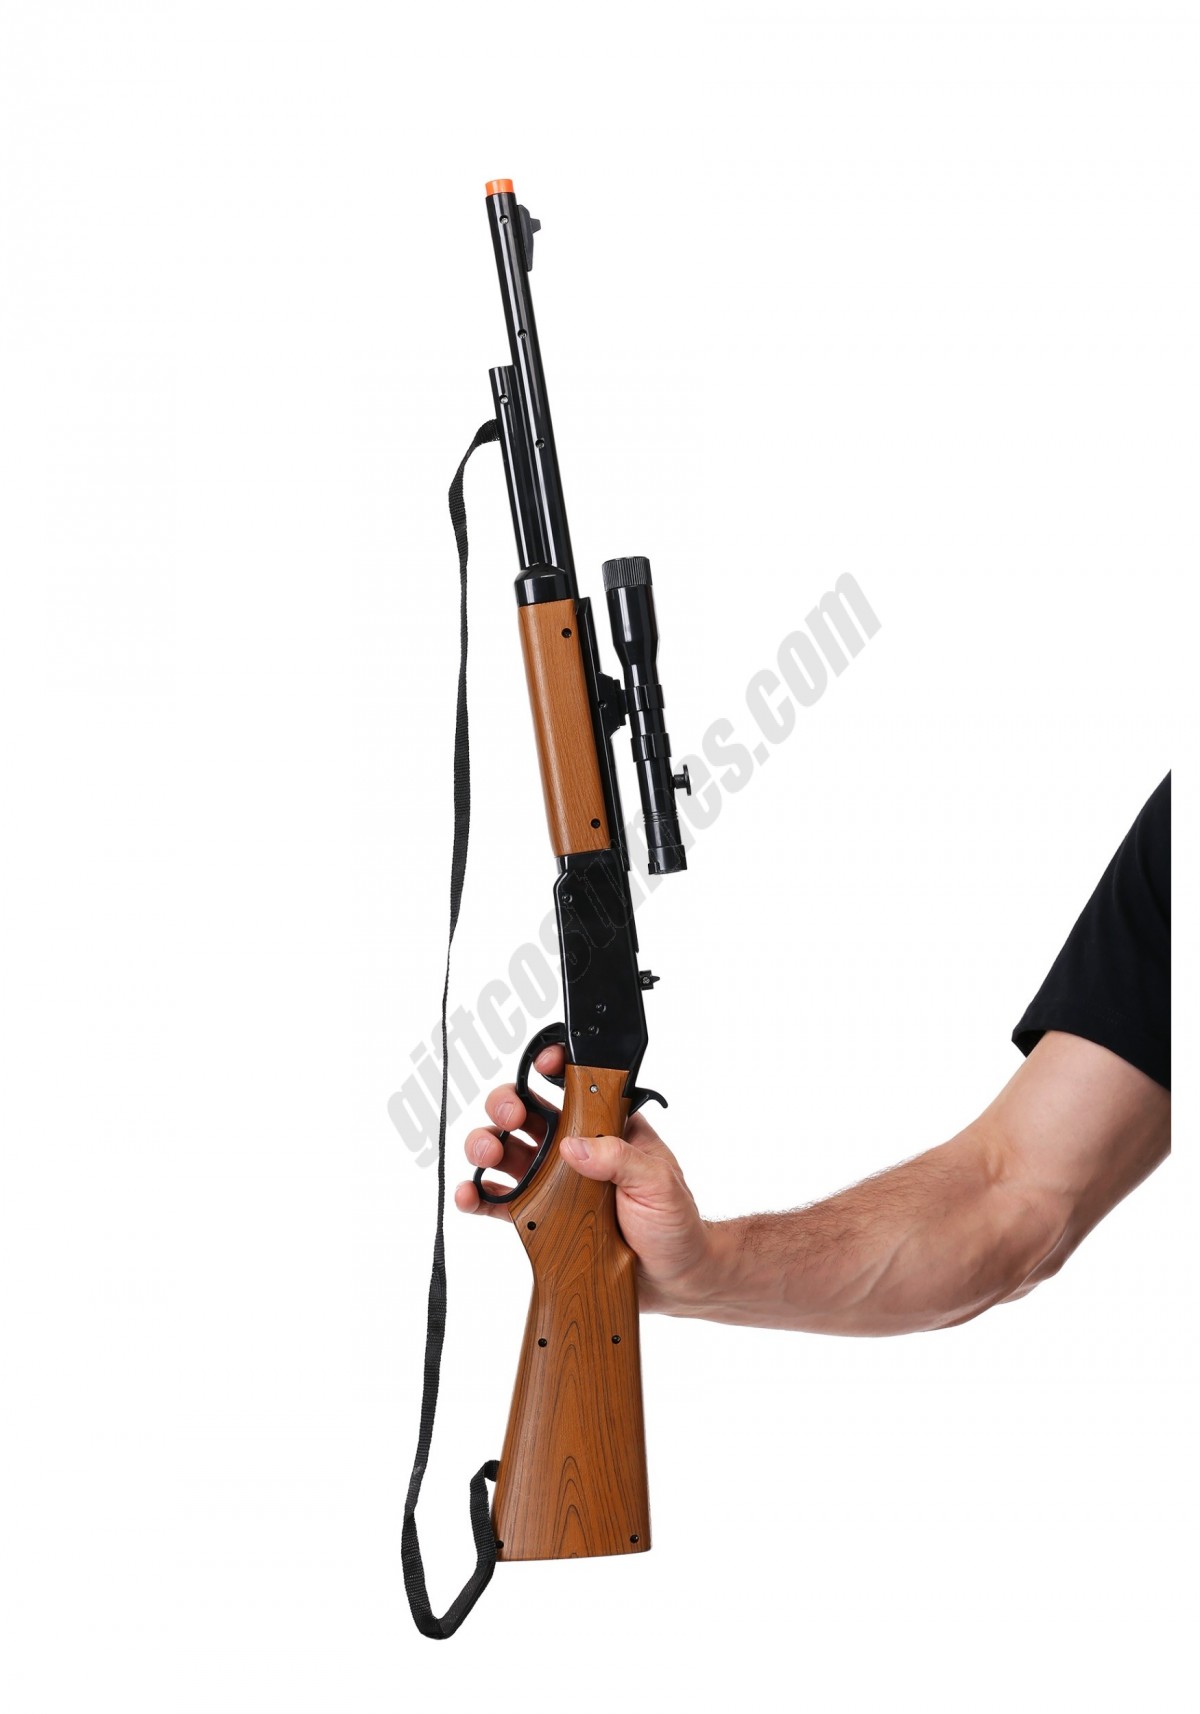 Lever Action Repeater Rifle with Scope Toy Weapon  Promotions - -0